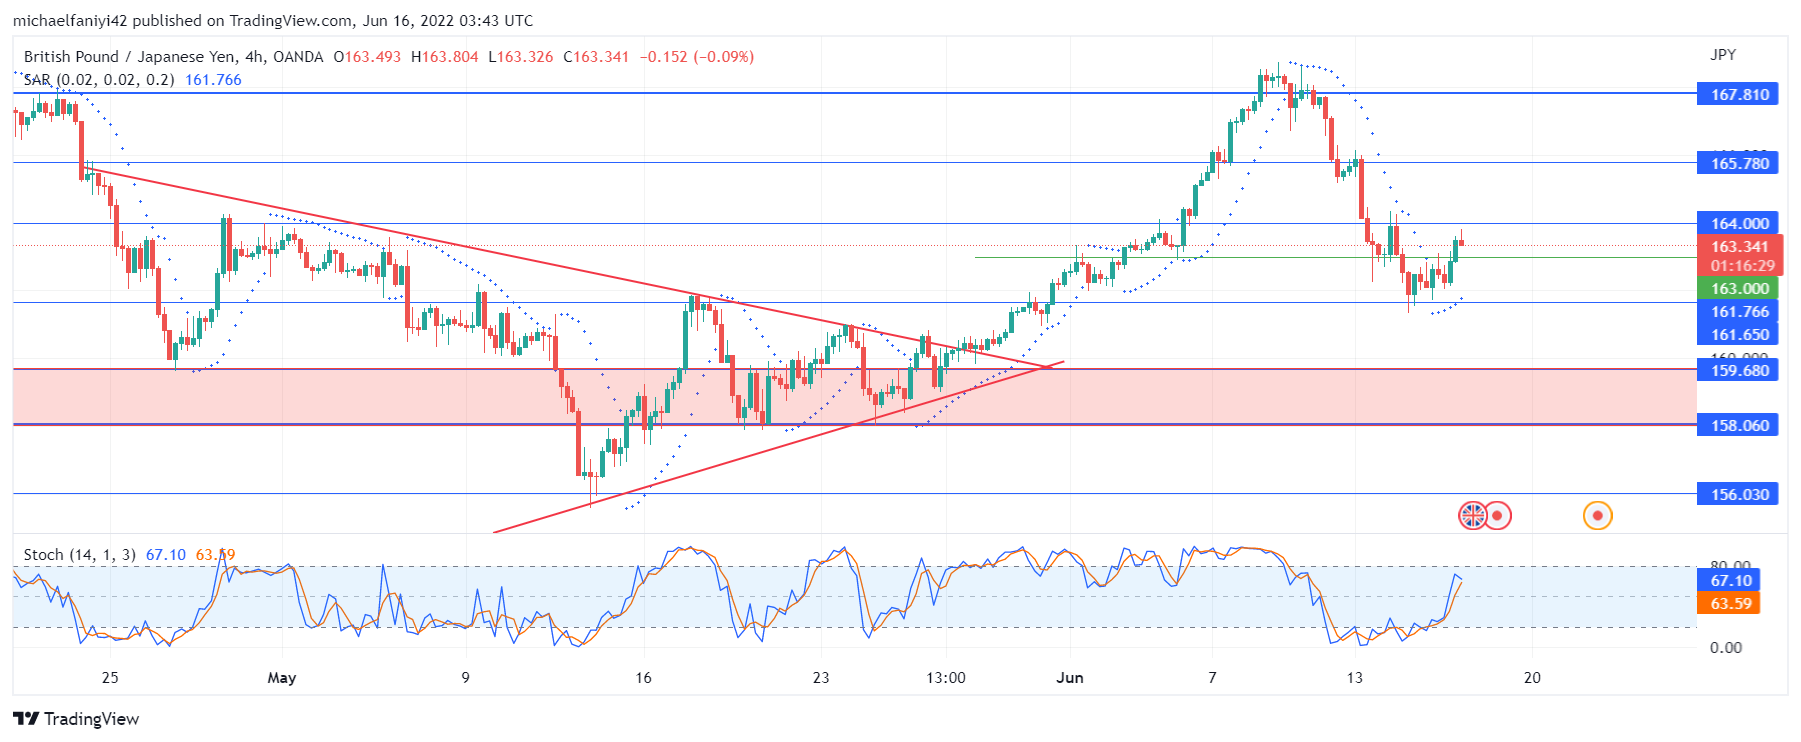 GBPJPY Commences Consolidation Below the 167.810 Resistance Level